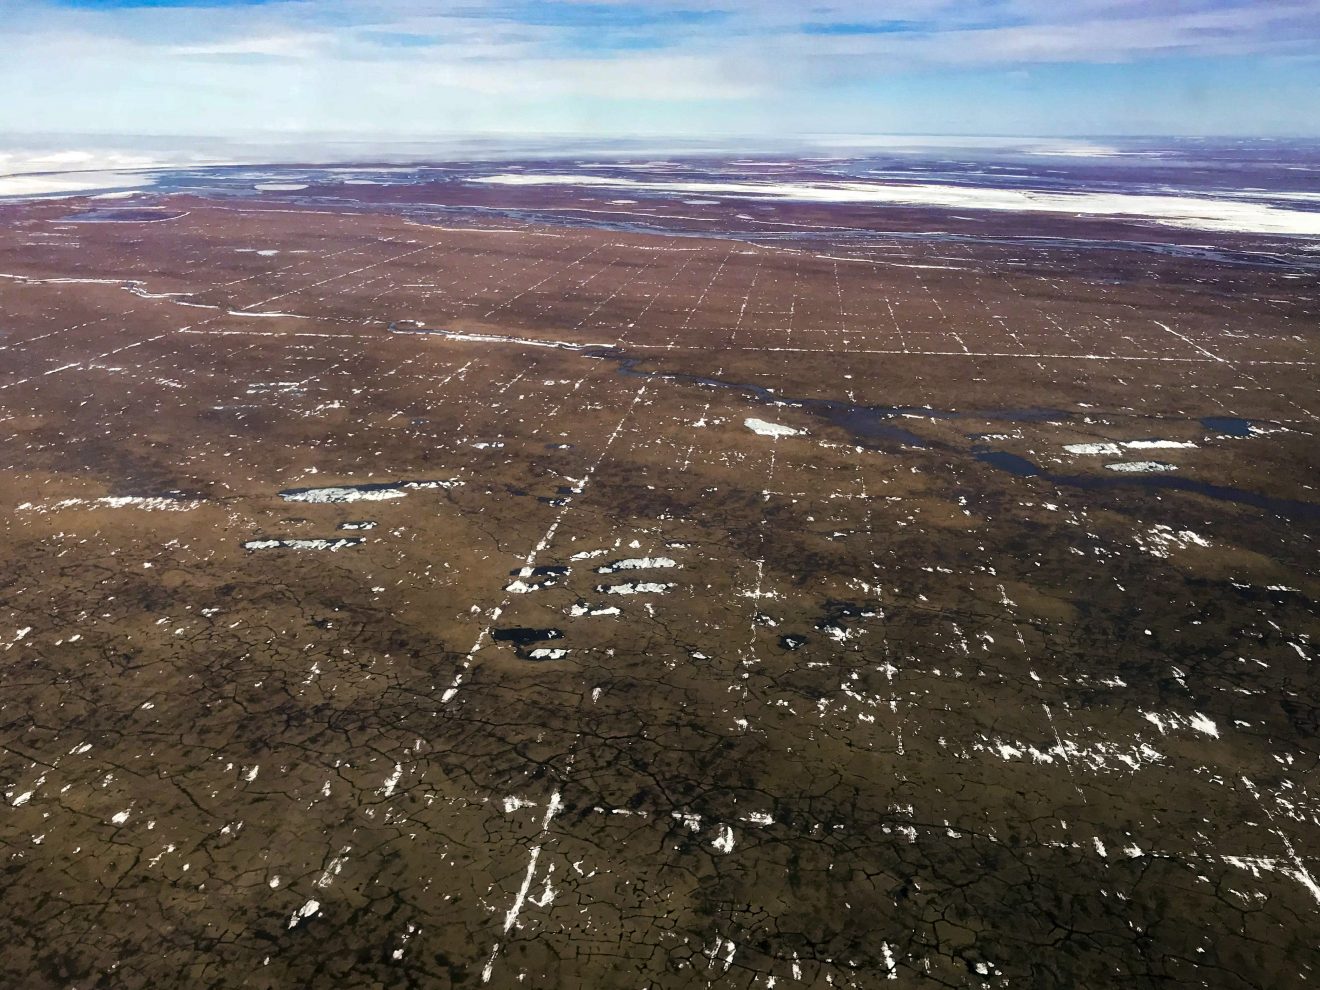 An early spring view of tracks left by a 3D seismic survey conducted in winter 2017-2018. The spacing of the tracks in the photo is 200-by-400 meters, rather than the 200-by-200-meter grid proposed by SAExporation. The photo is not an example of the long-term damage found by researchers in other areas. Photo by Matt Nolan